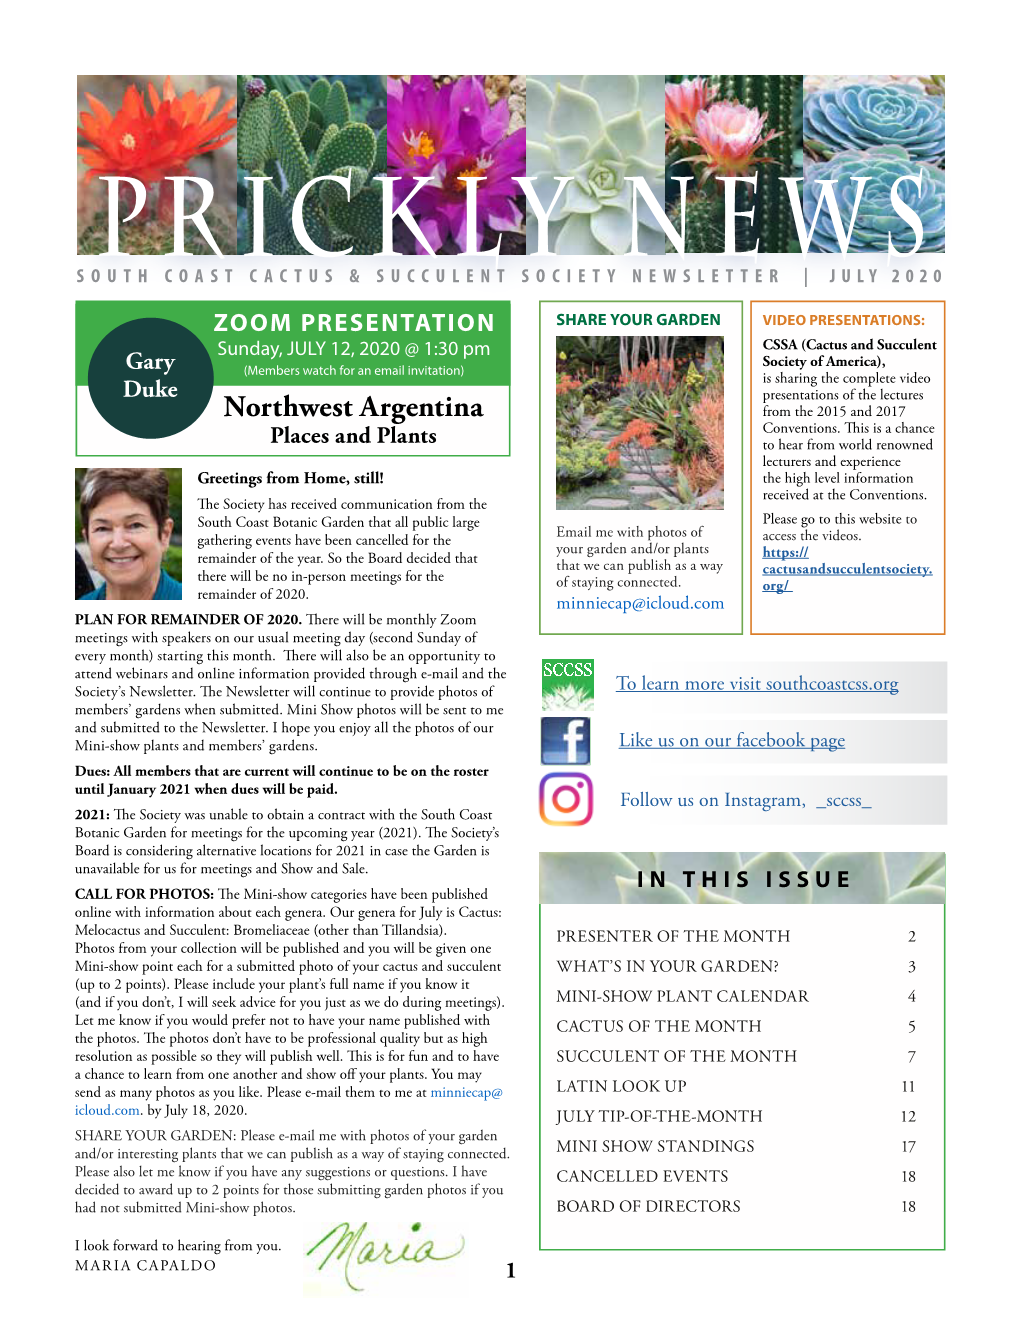 Prickly News South Coast Cactus & Succulent Society Newsletter | July 2020